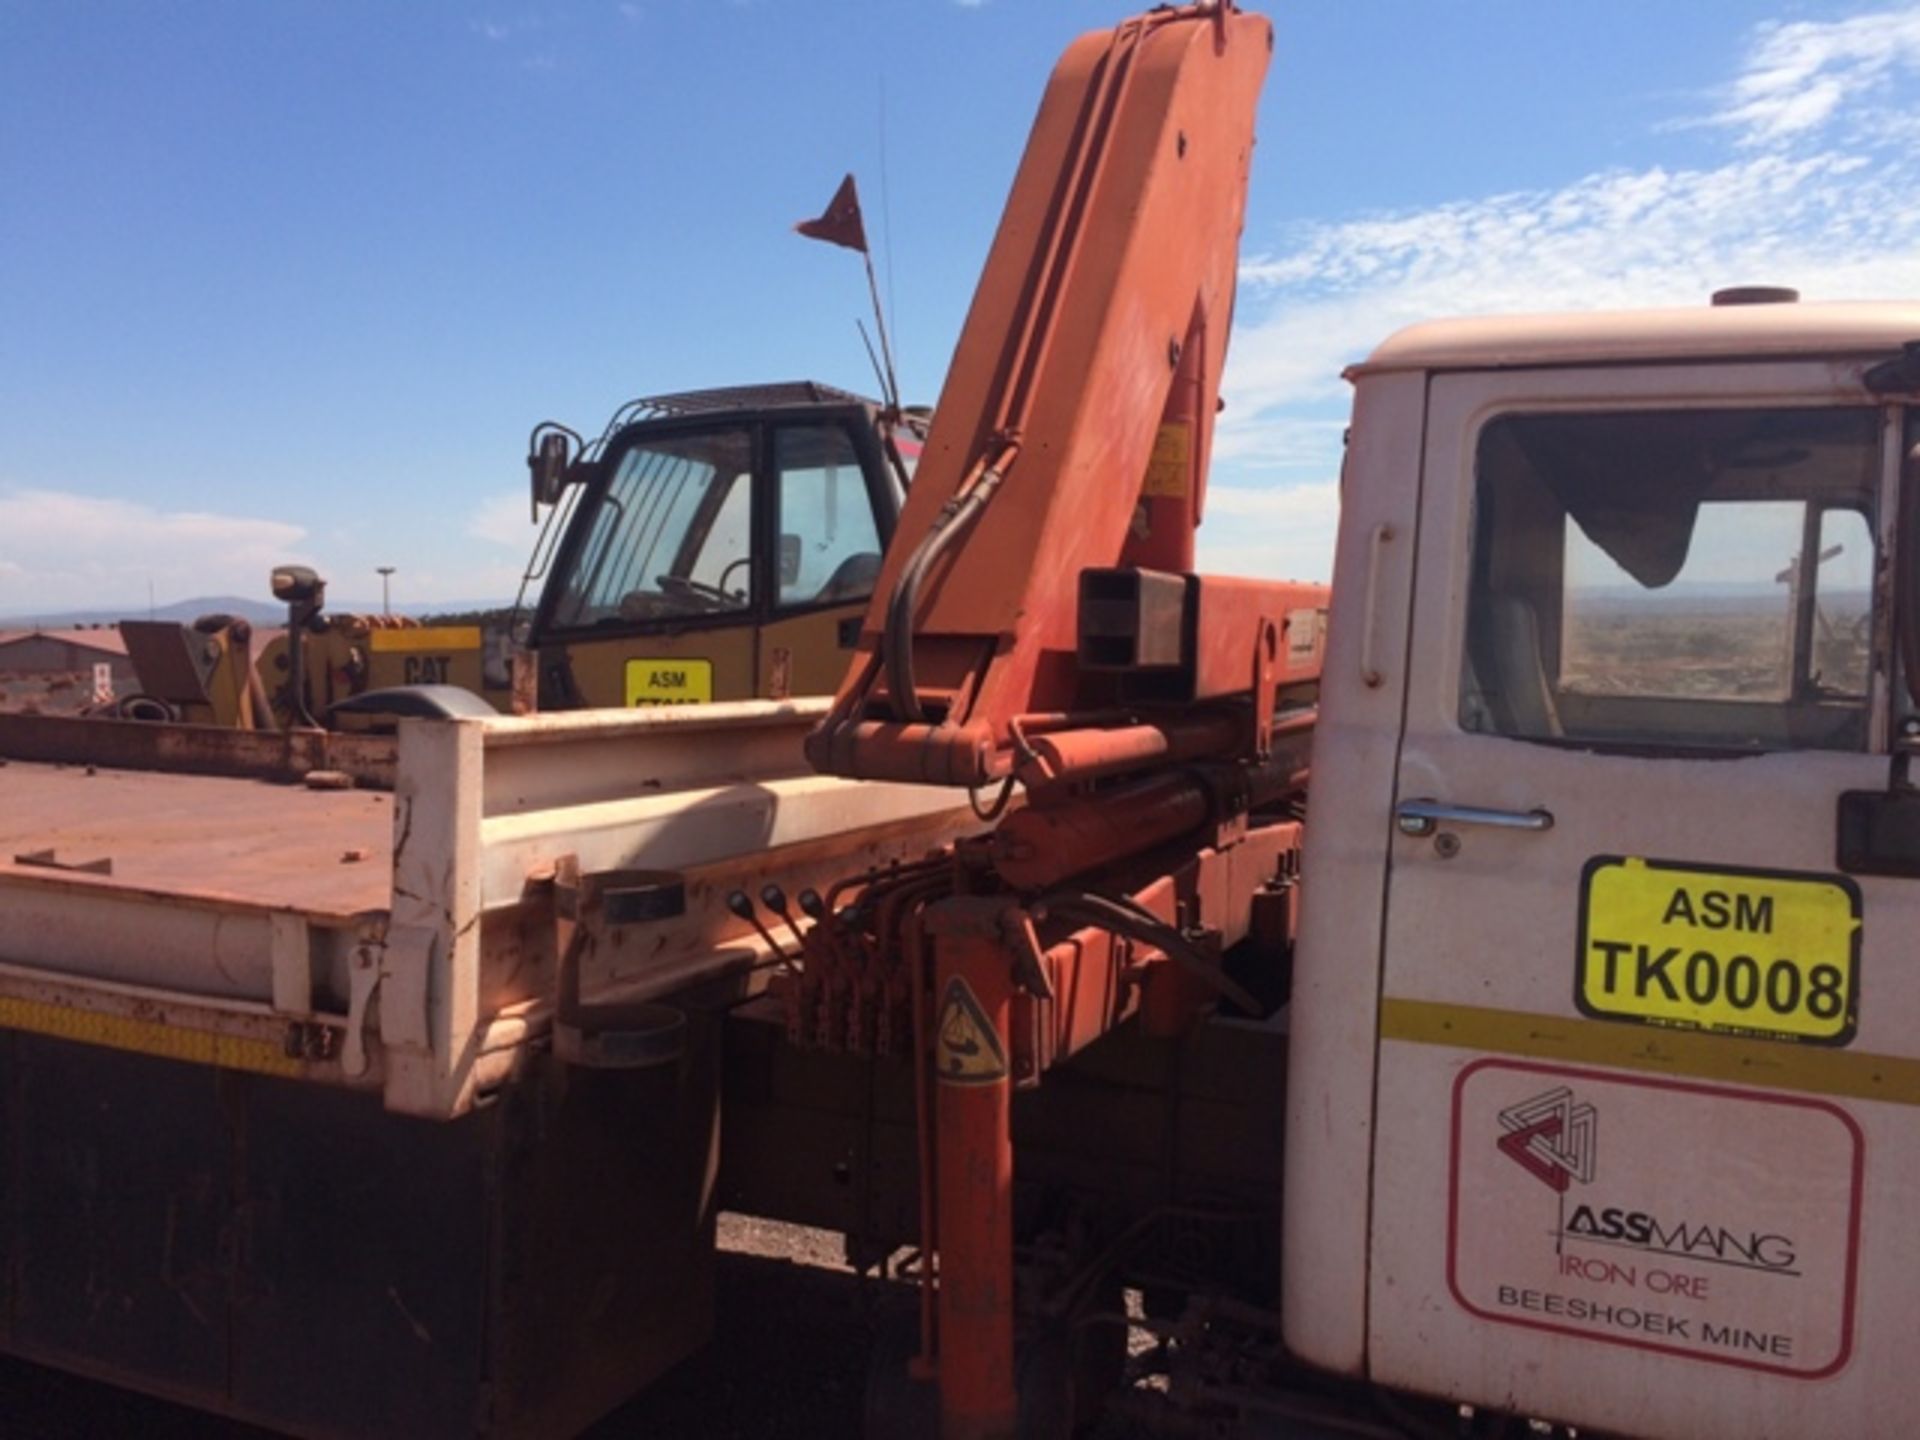 1997TOYOTA S/AXLE DROPSIDES TRUCK WITH 750CRANE 5440KM(DEREG.NO DOC FEE) 21 DAY PAPER DELAY)BEESHOEK - Image 7 of 10